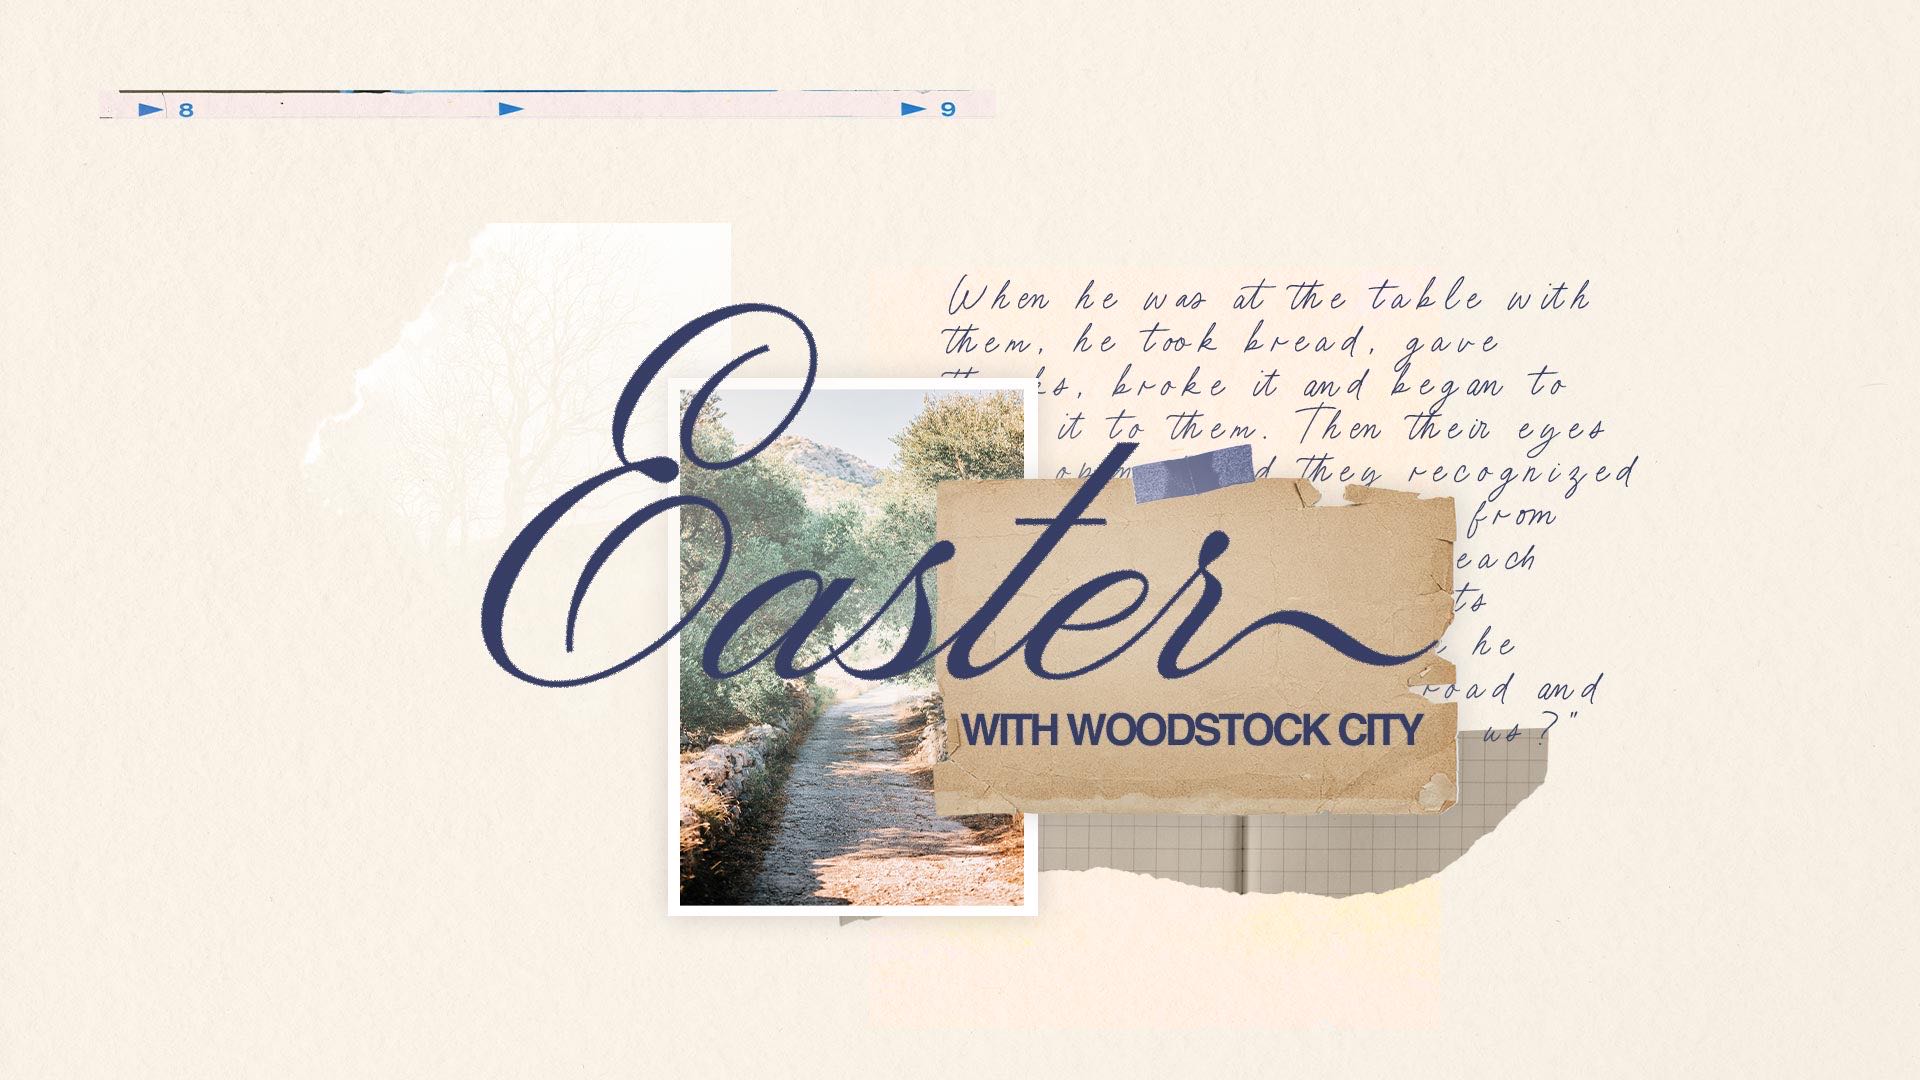 Easter with Woodstock City: Unbelievable